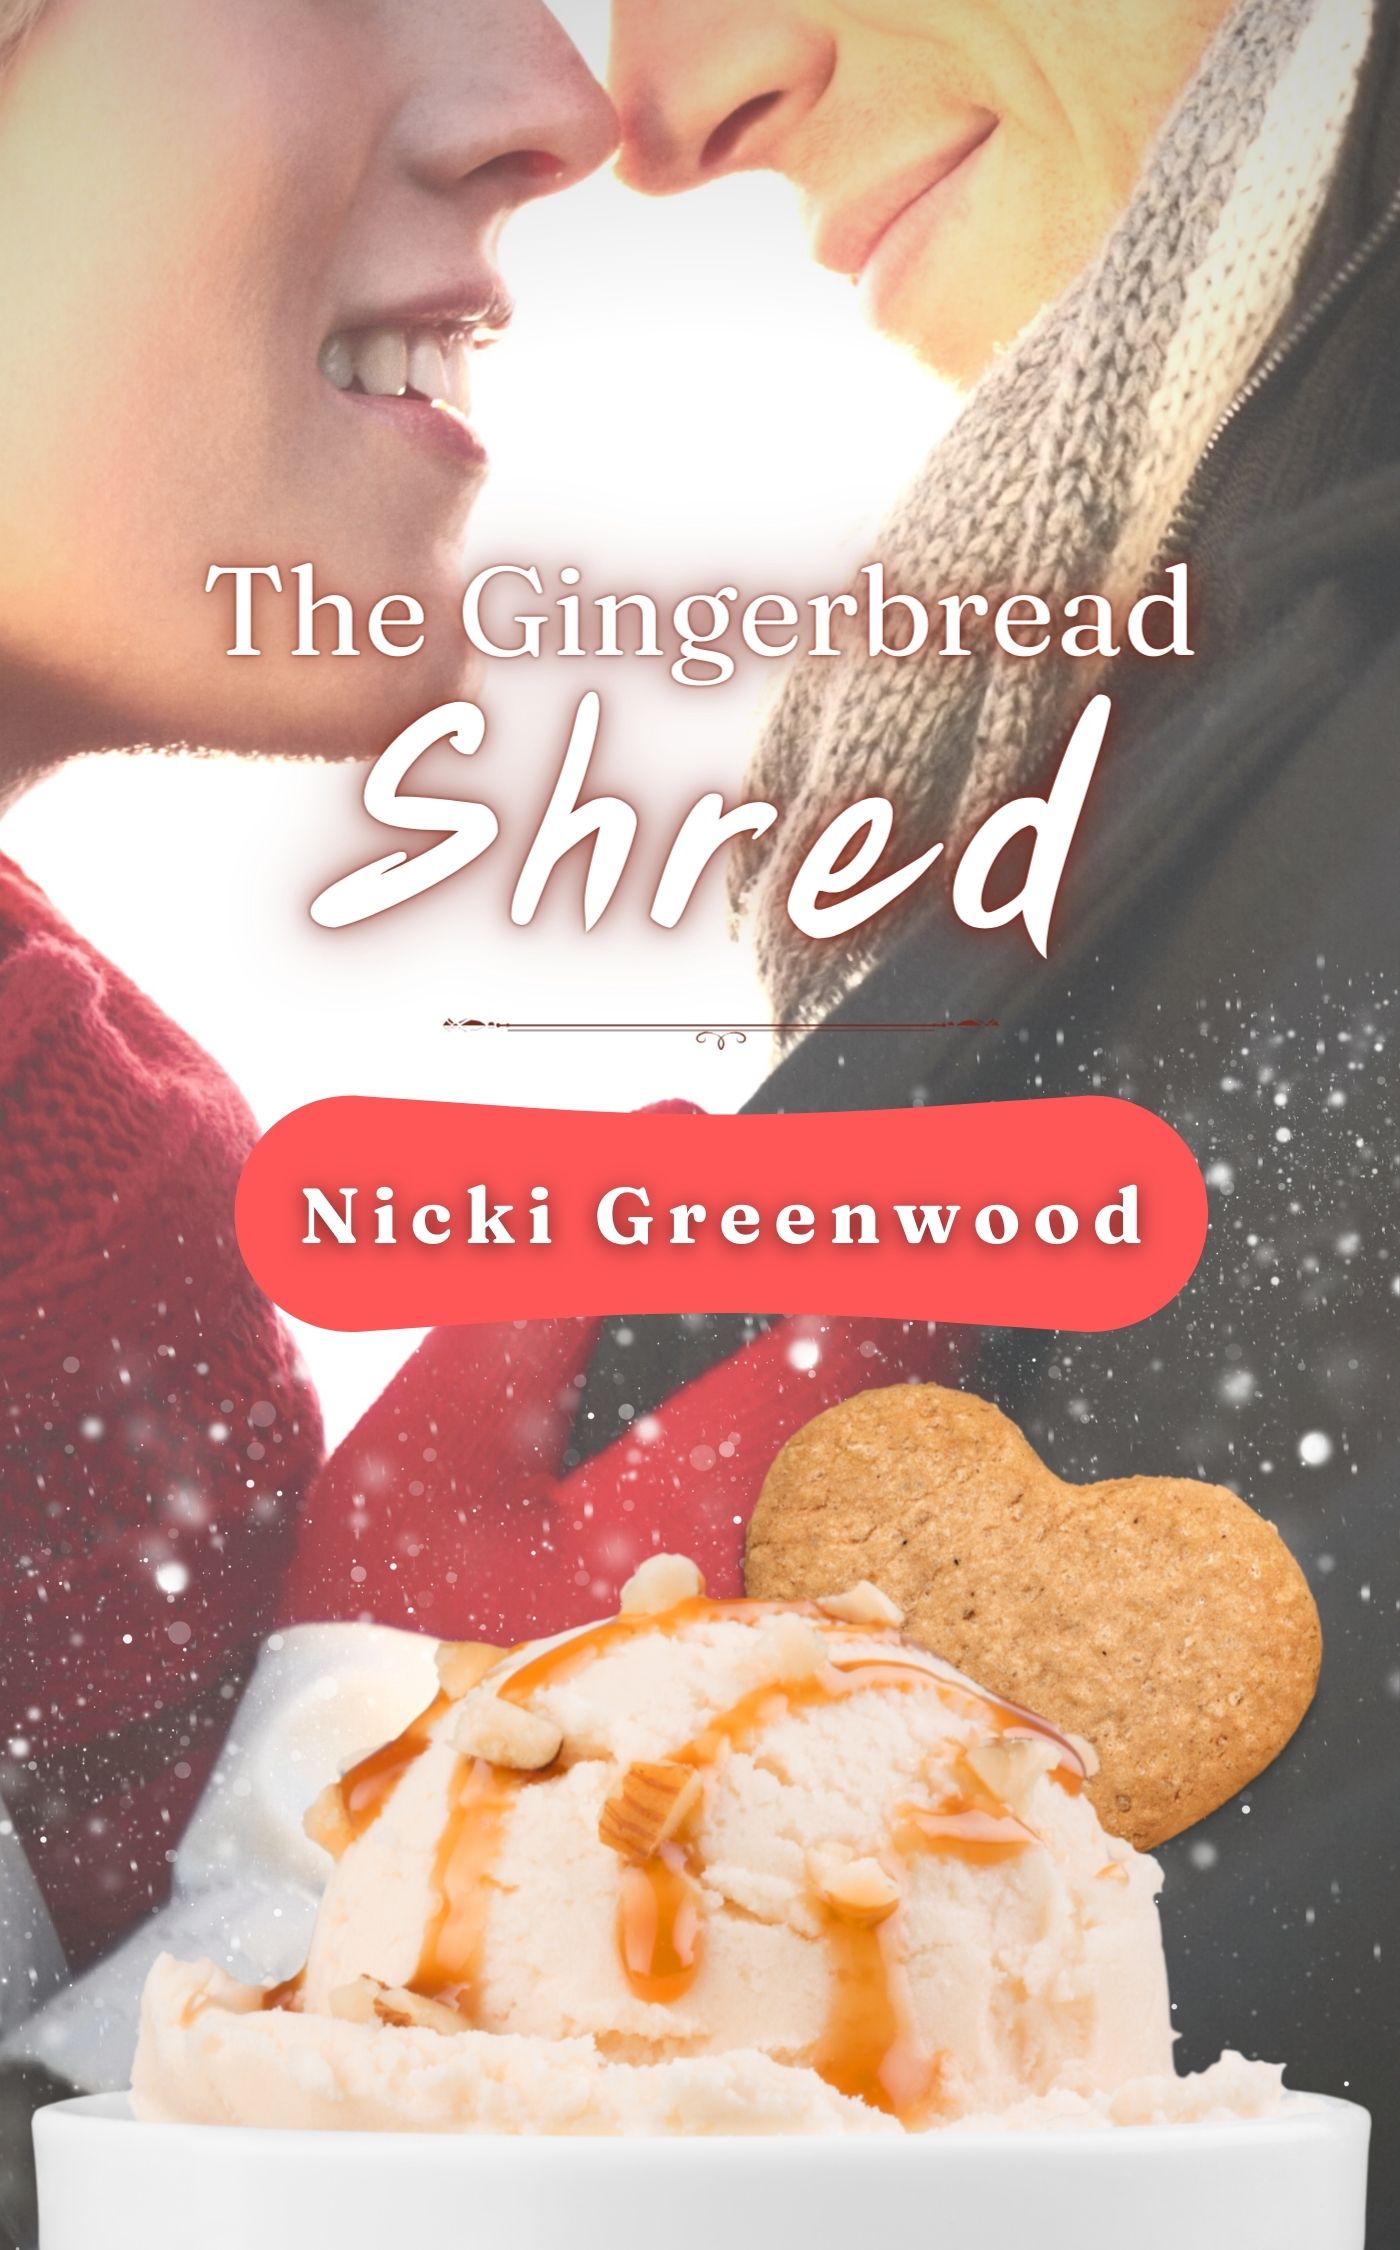 The Gingerbread Shred